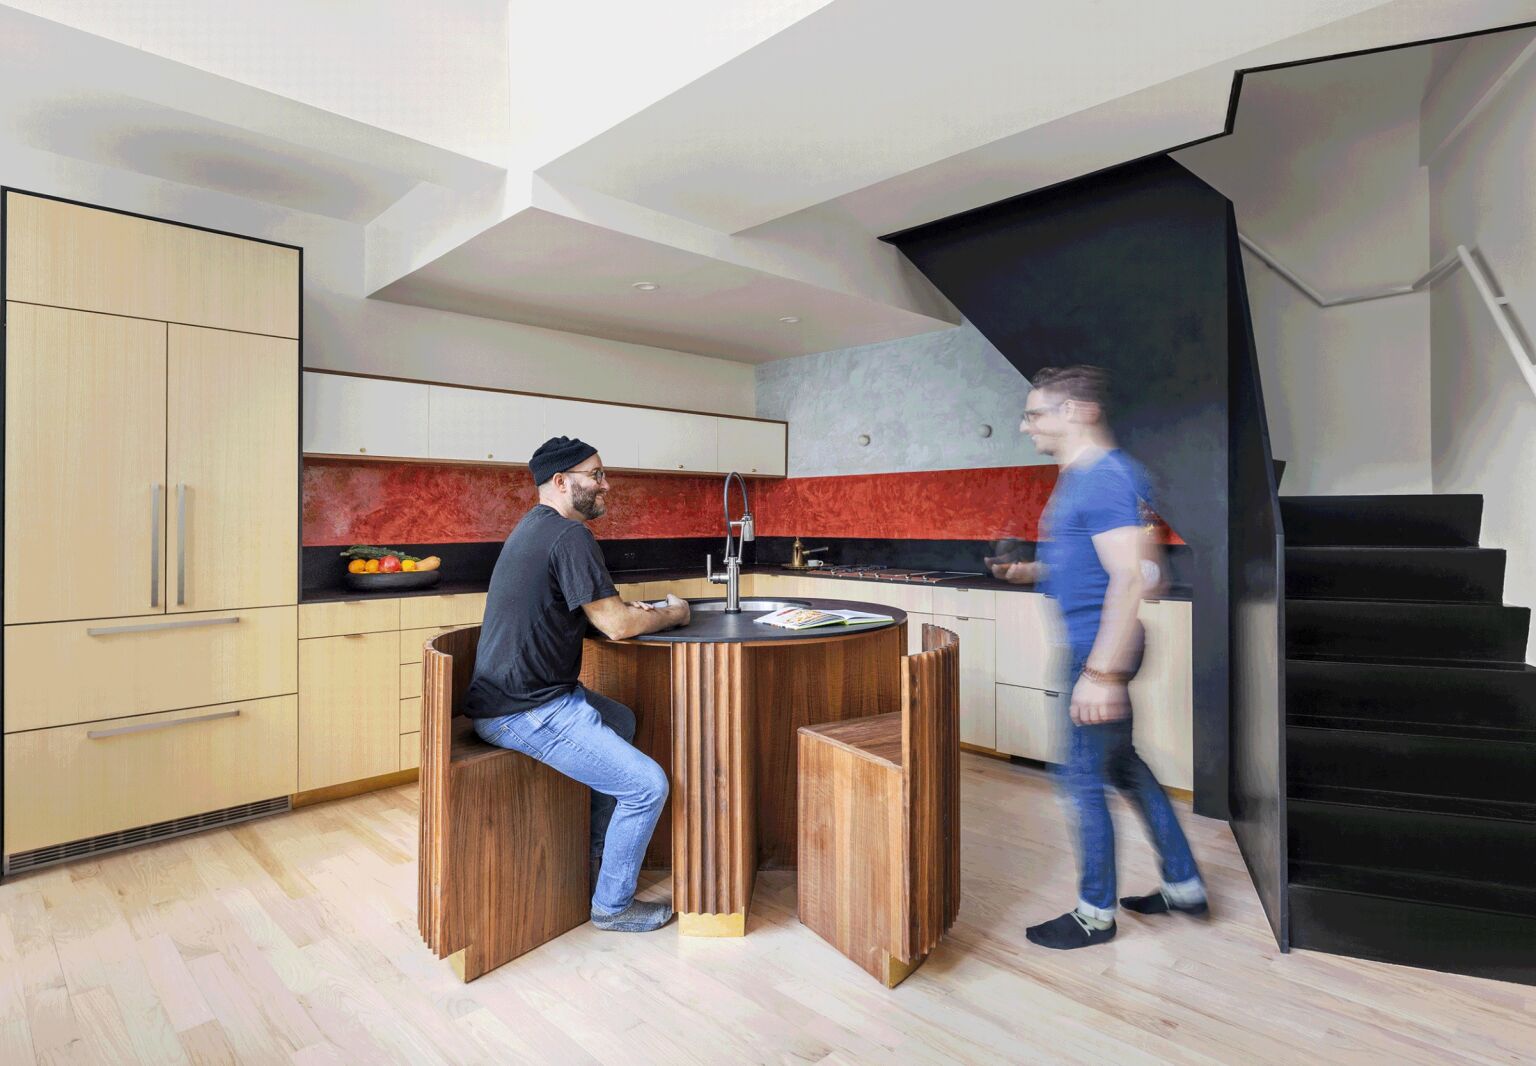 A Kitchen with a Cubist Look